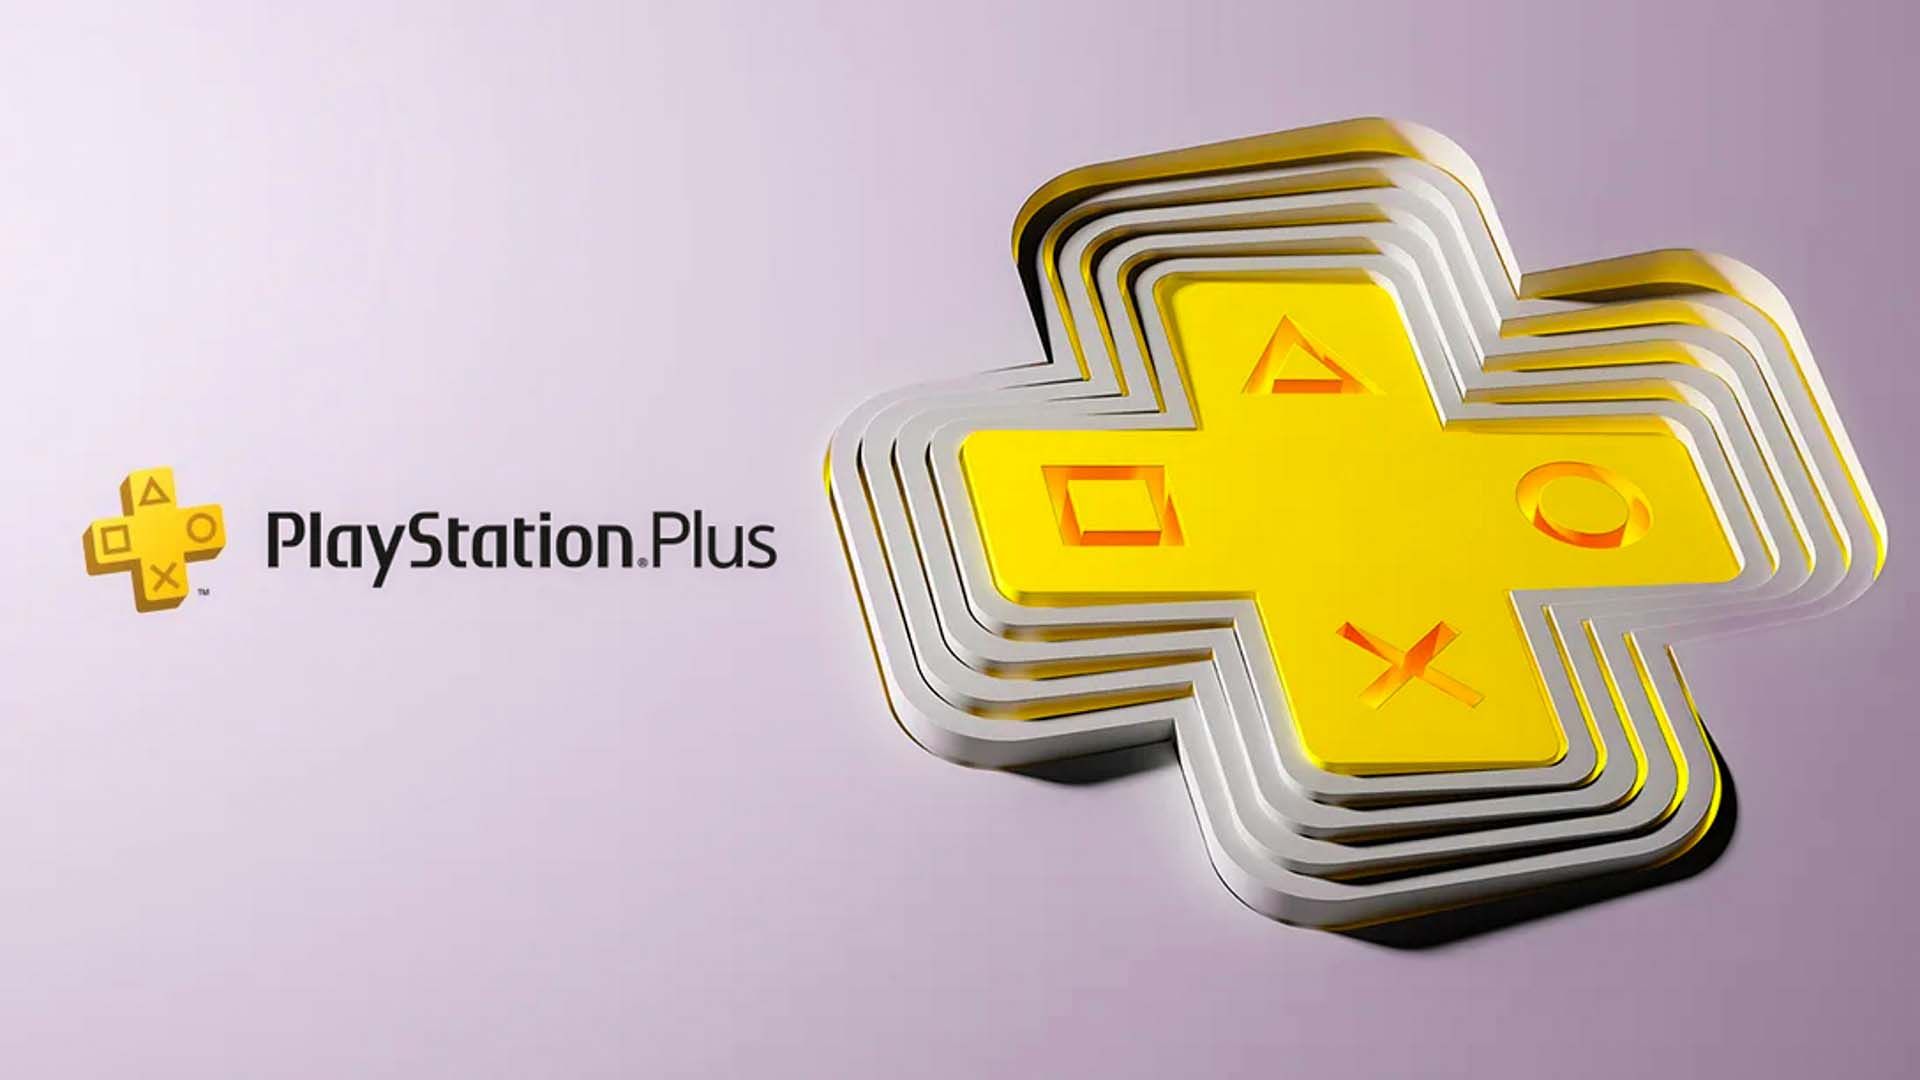 October's PlayStation Plus Essential games are now available to claim